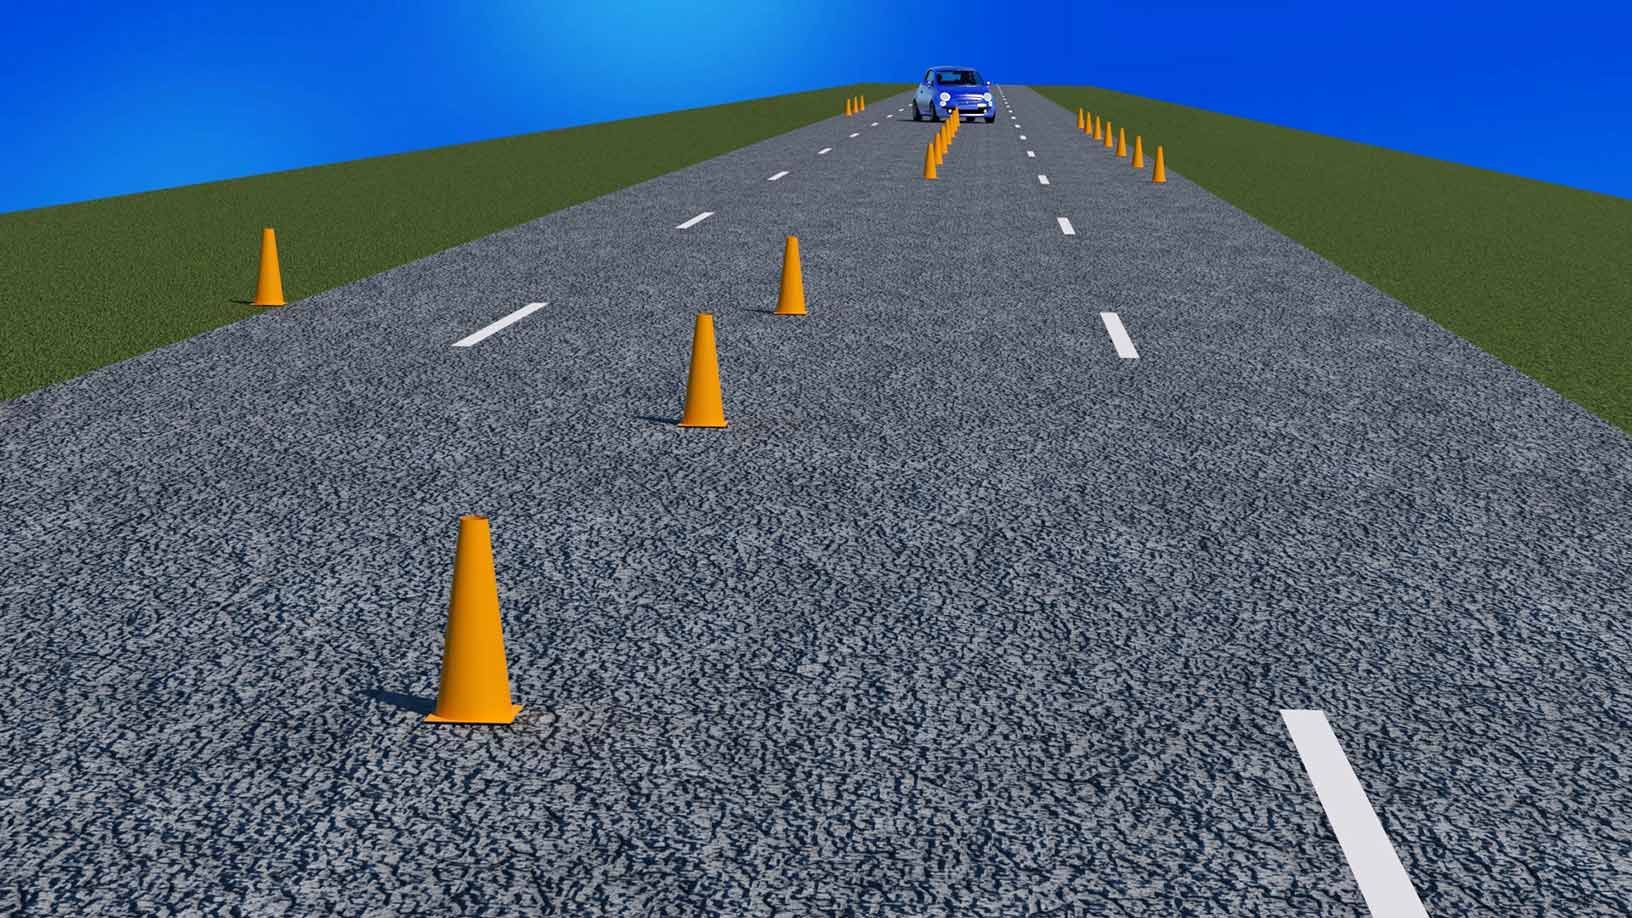 Simulation of a vehicle changing lanes 